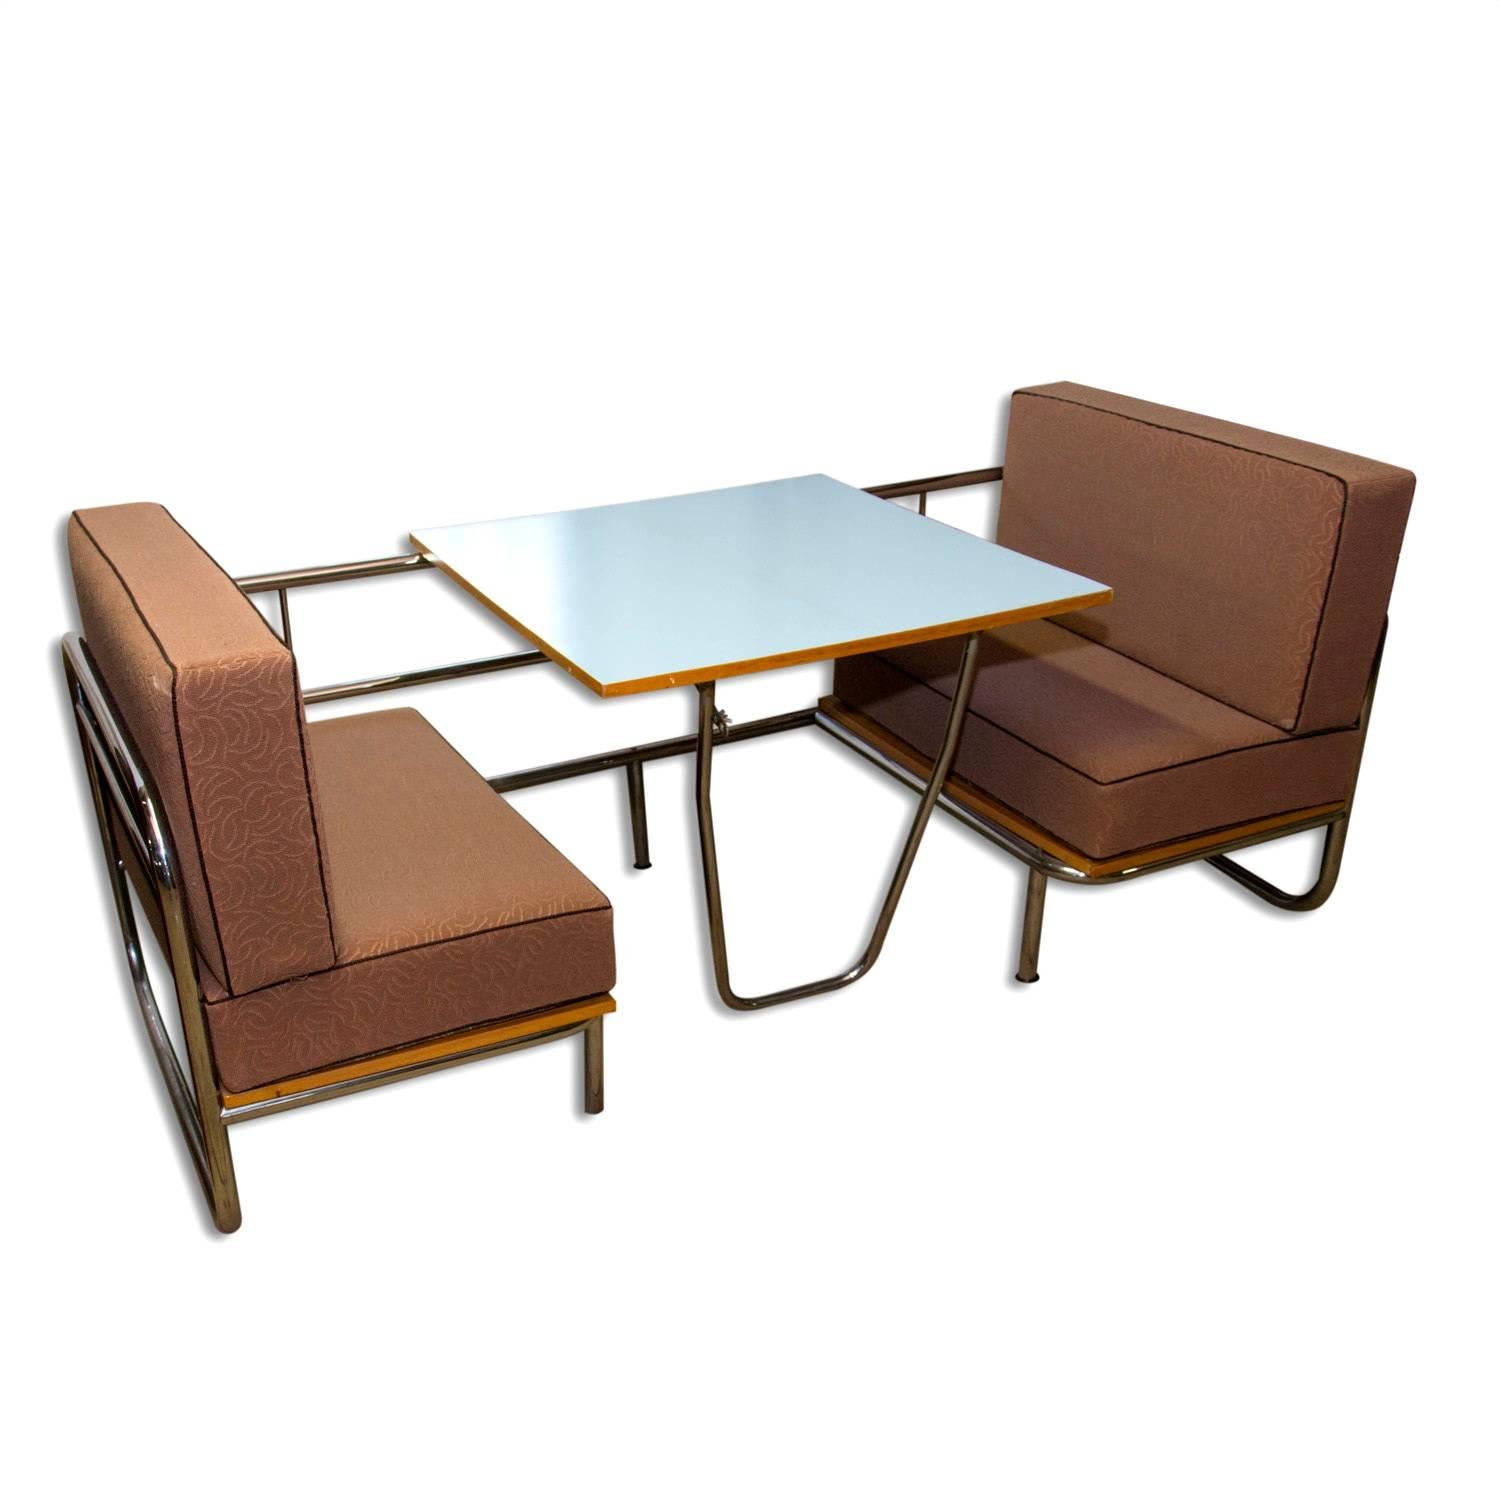 An outstanding and seldom-seen piece of mid century – functionalist furniture. A multipurpose seating including dining(coffee) table in combination with sofa bed. Chromium plated construction of the sofa. Material: chrome, laminate, particle board,